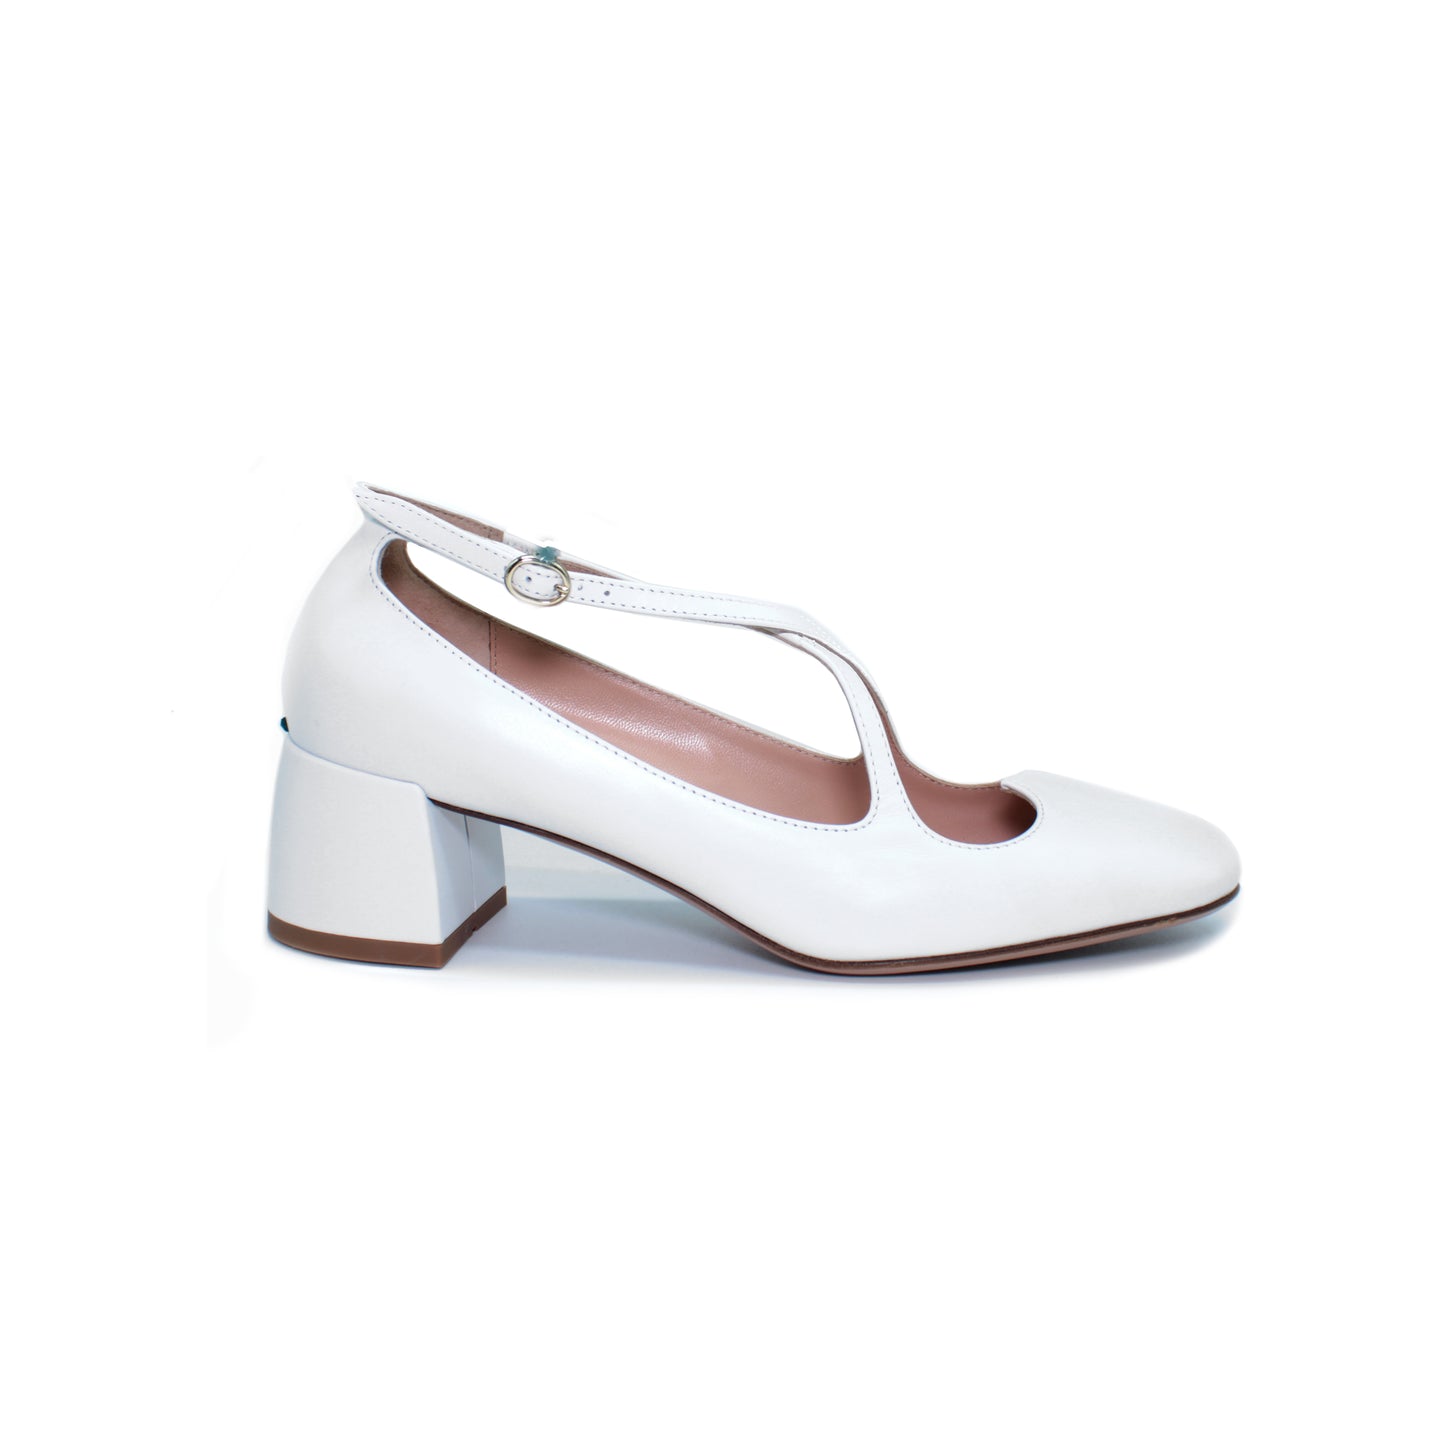 Pump Two for Love in white calfskin